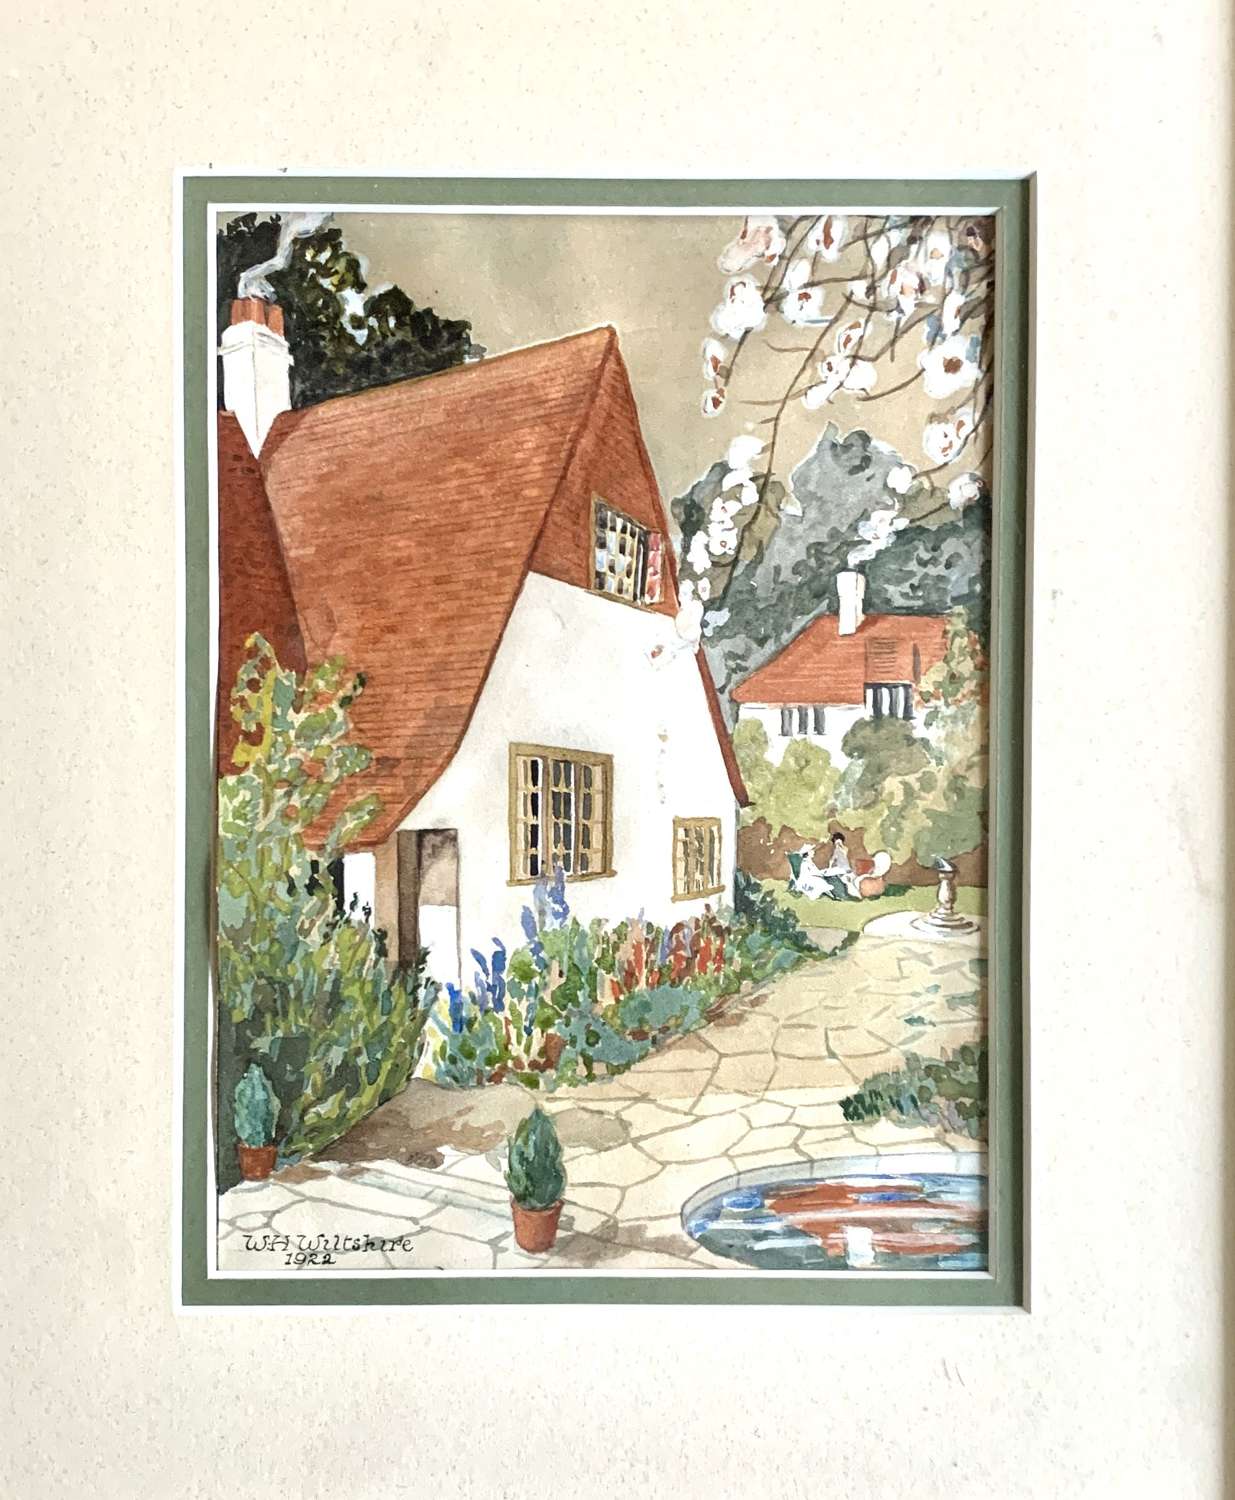 W.H. Wiltshire, Watercolour of Cottages, dated 1922